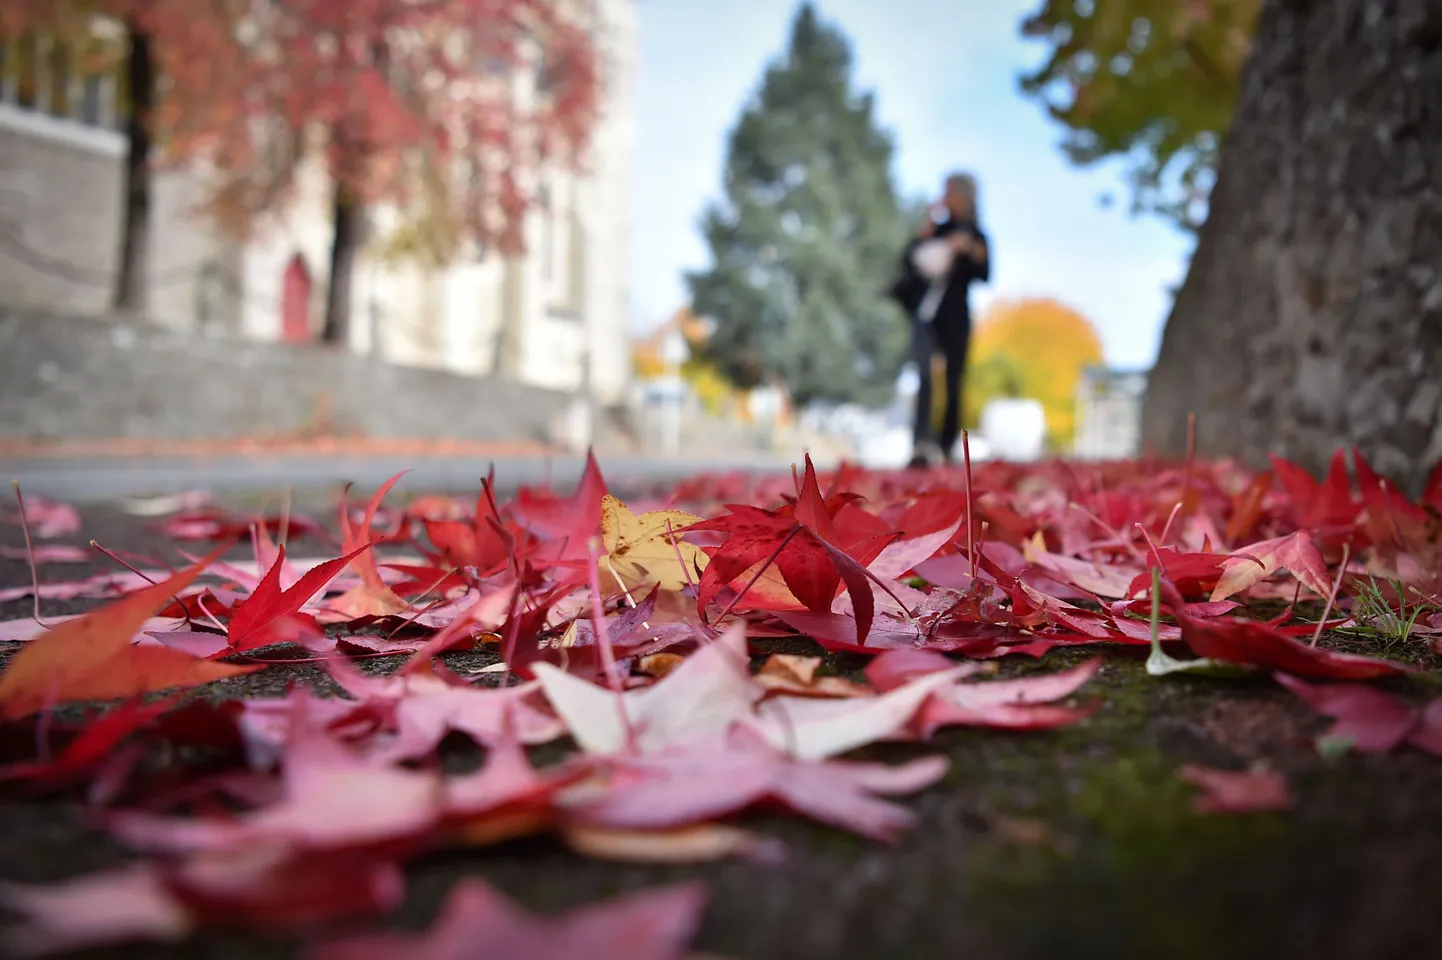 A picture taken on October 18, 2018 shows autumn dead leaves falling on the ground in front of the Sainte-Bernadette church in Orvault, western France. (Photo by LOIC VENANCE / AFP)